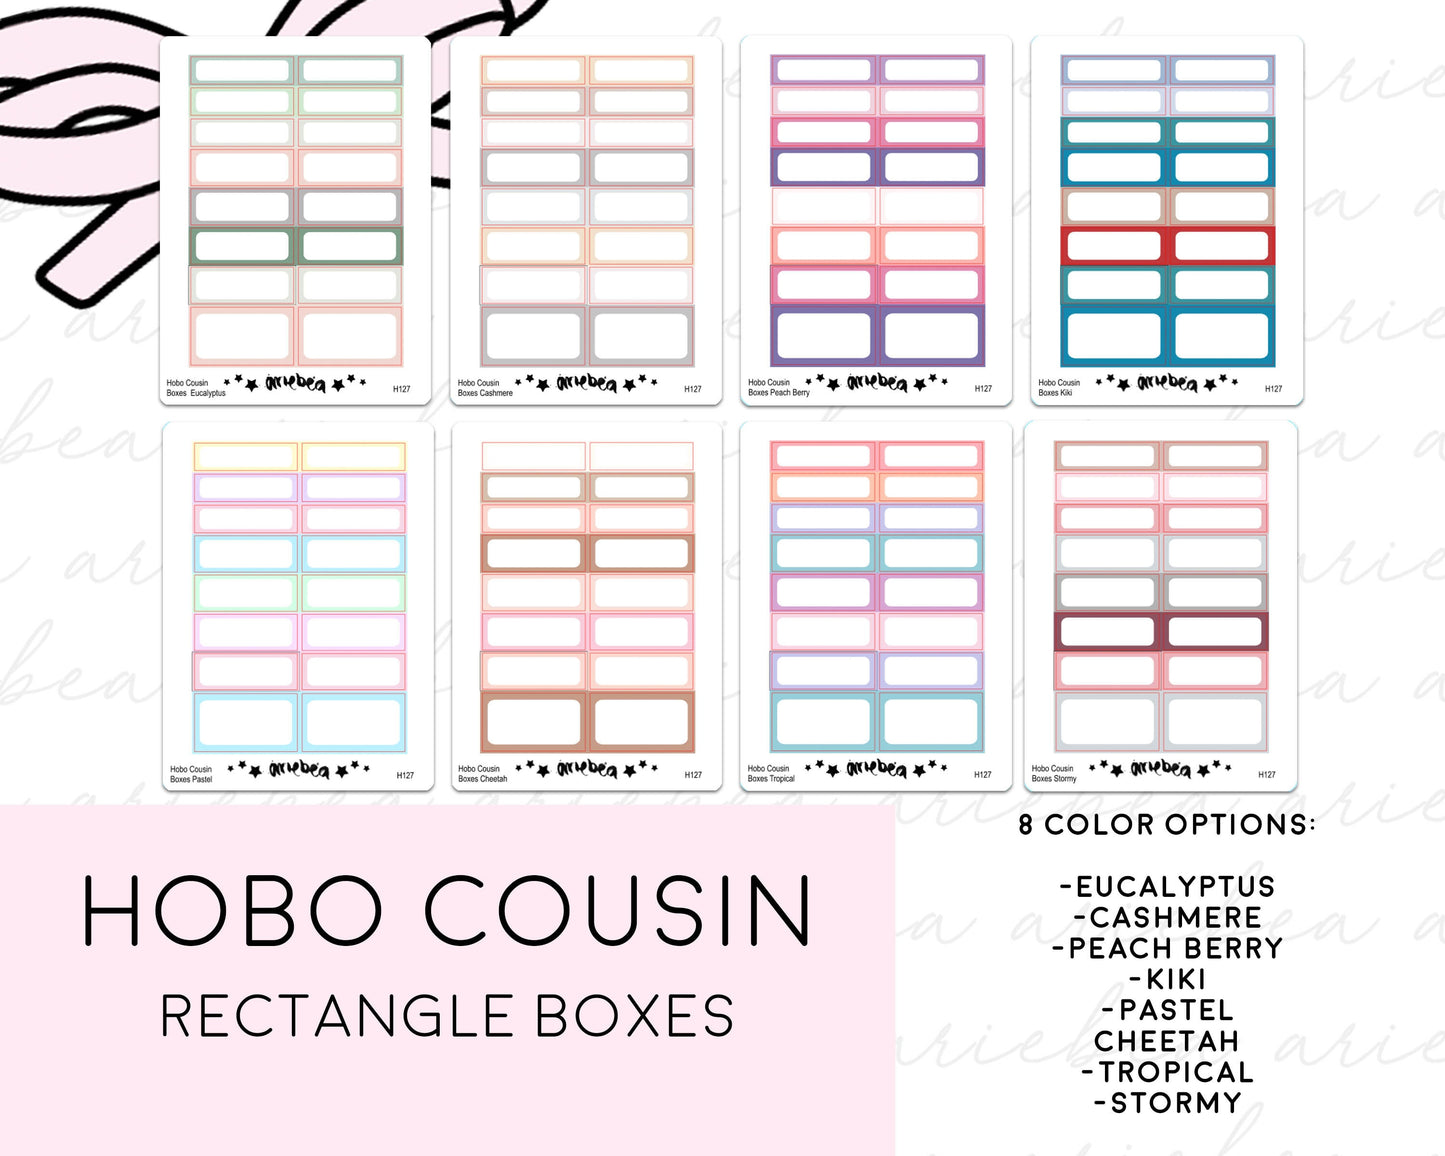 Hobonichi Cousin Boxes Rectangle Planner Stickers